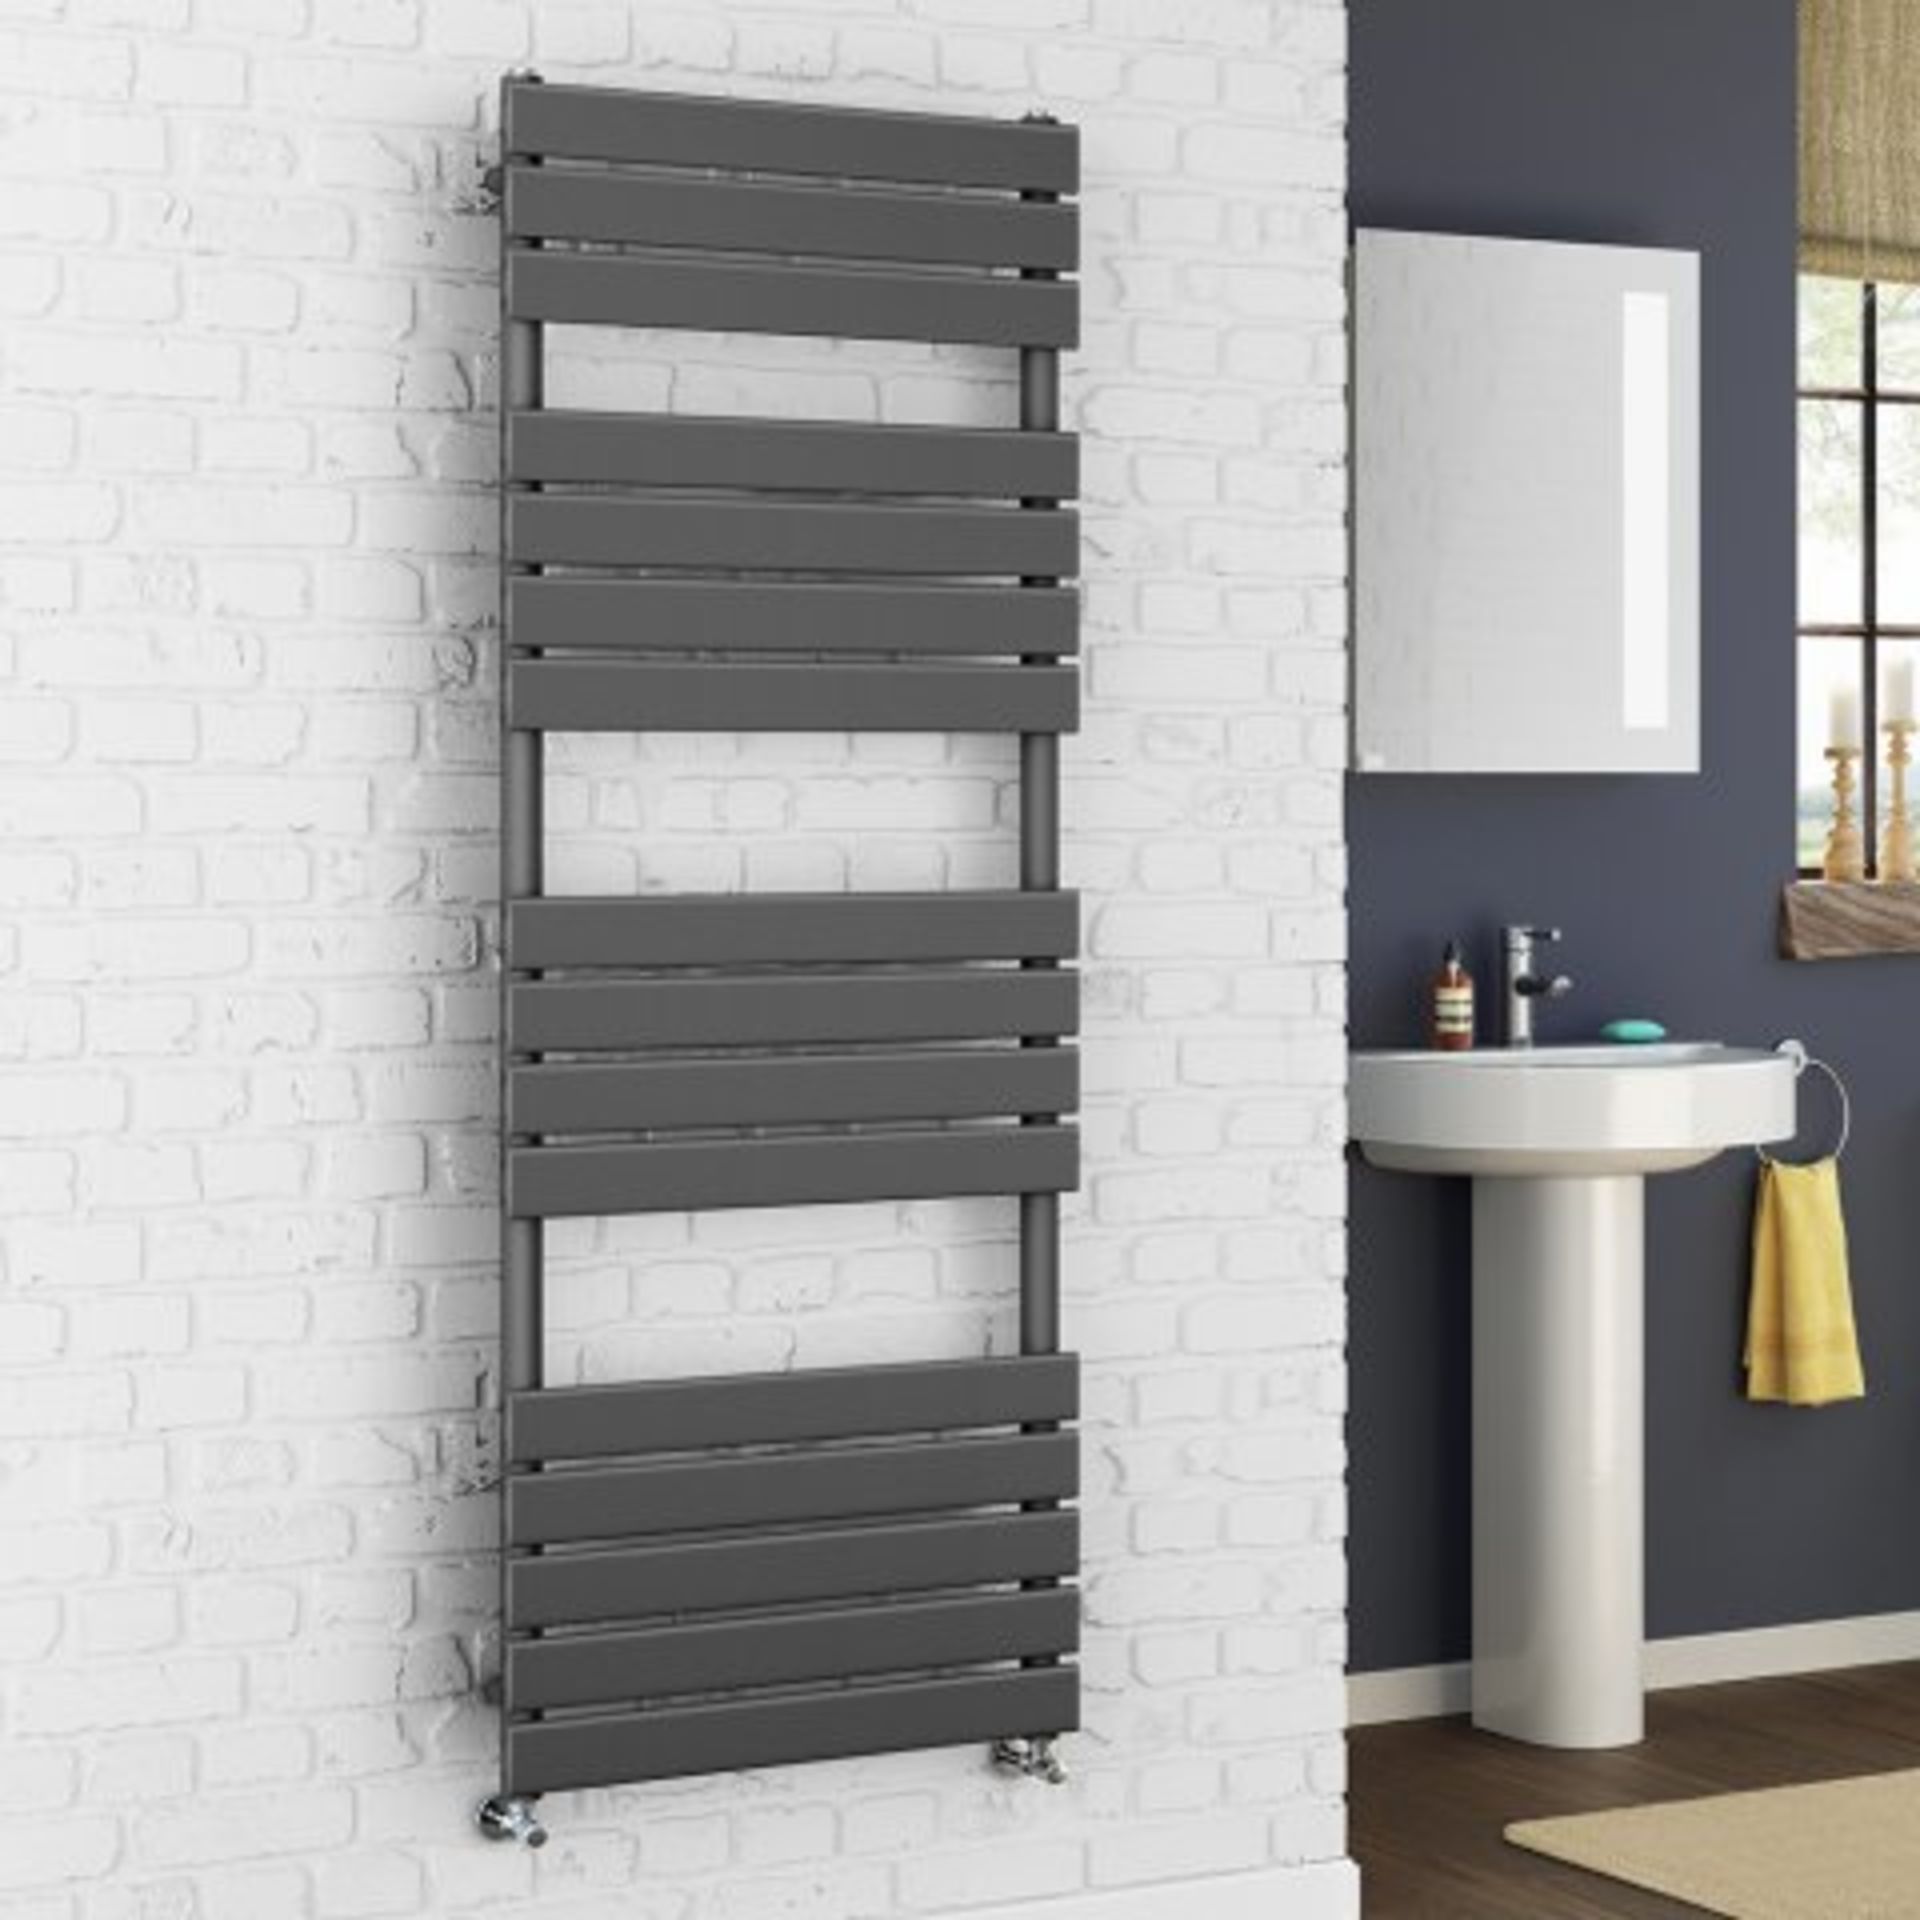 N69 - 1600x480mm Anthracite Double Oval Tube Vertical Radiator - Ember Premium. RRP £303.99. For